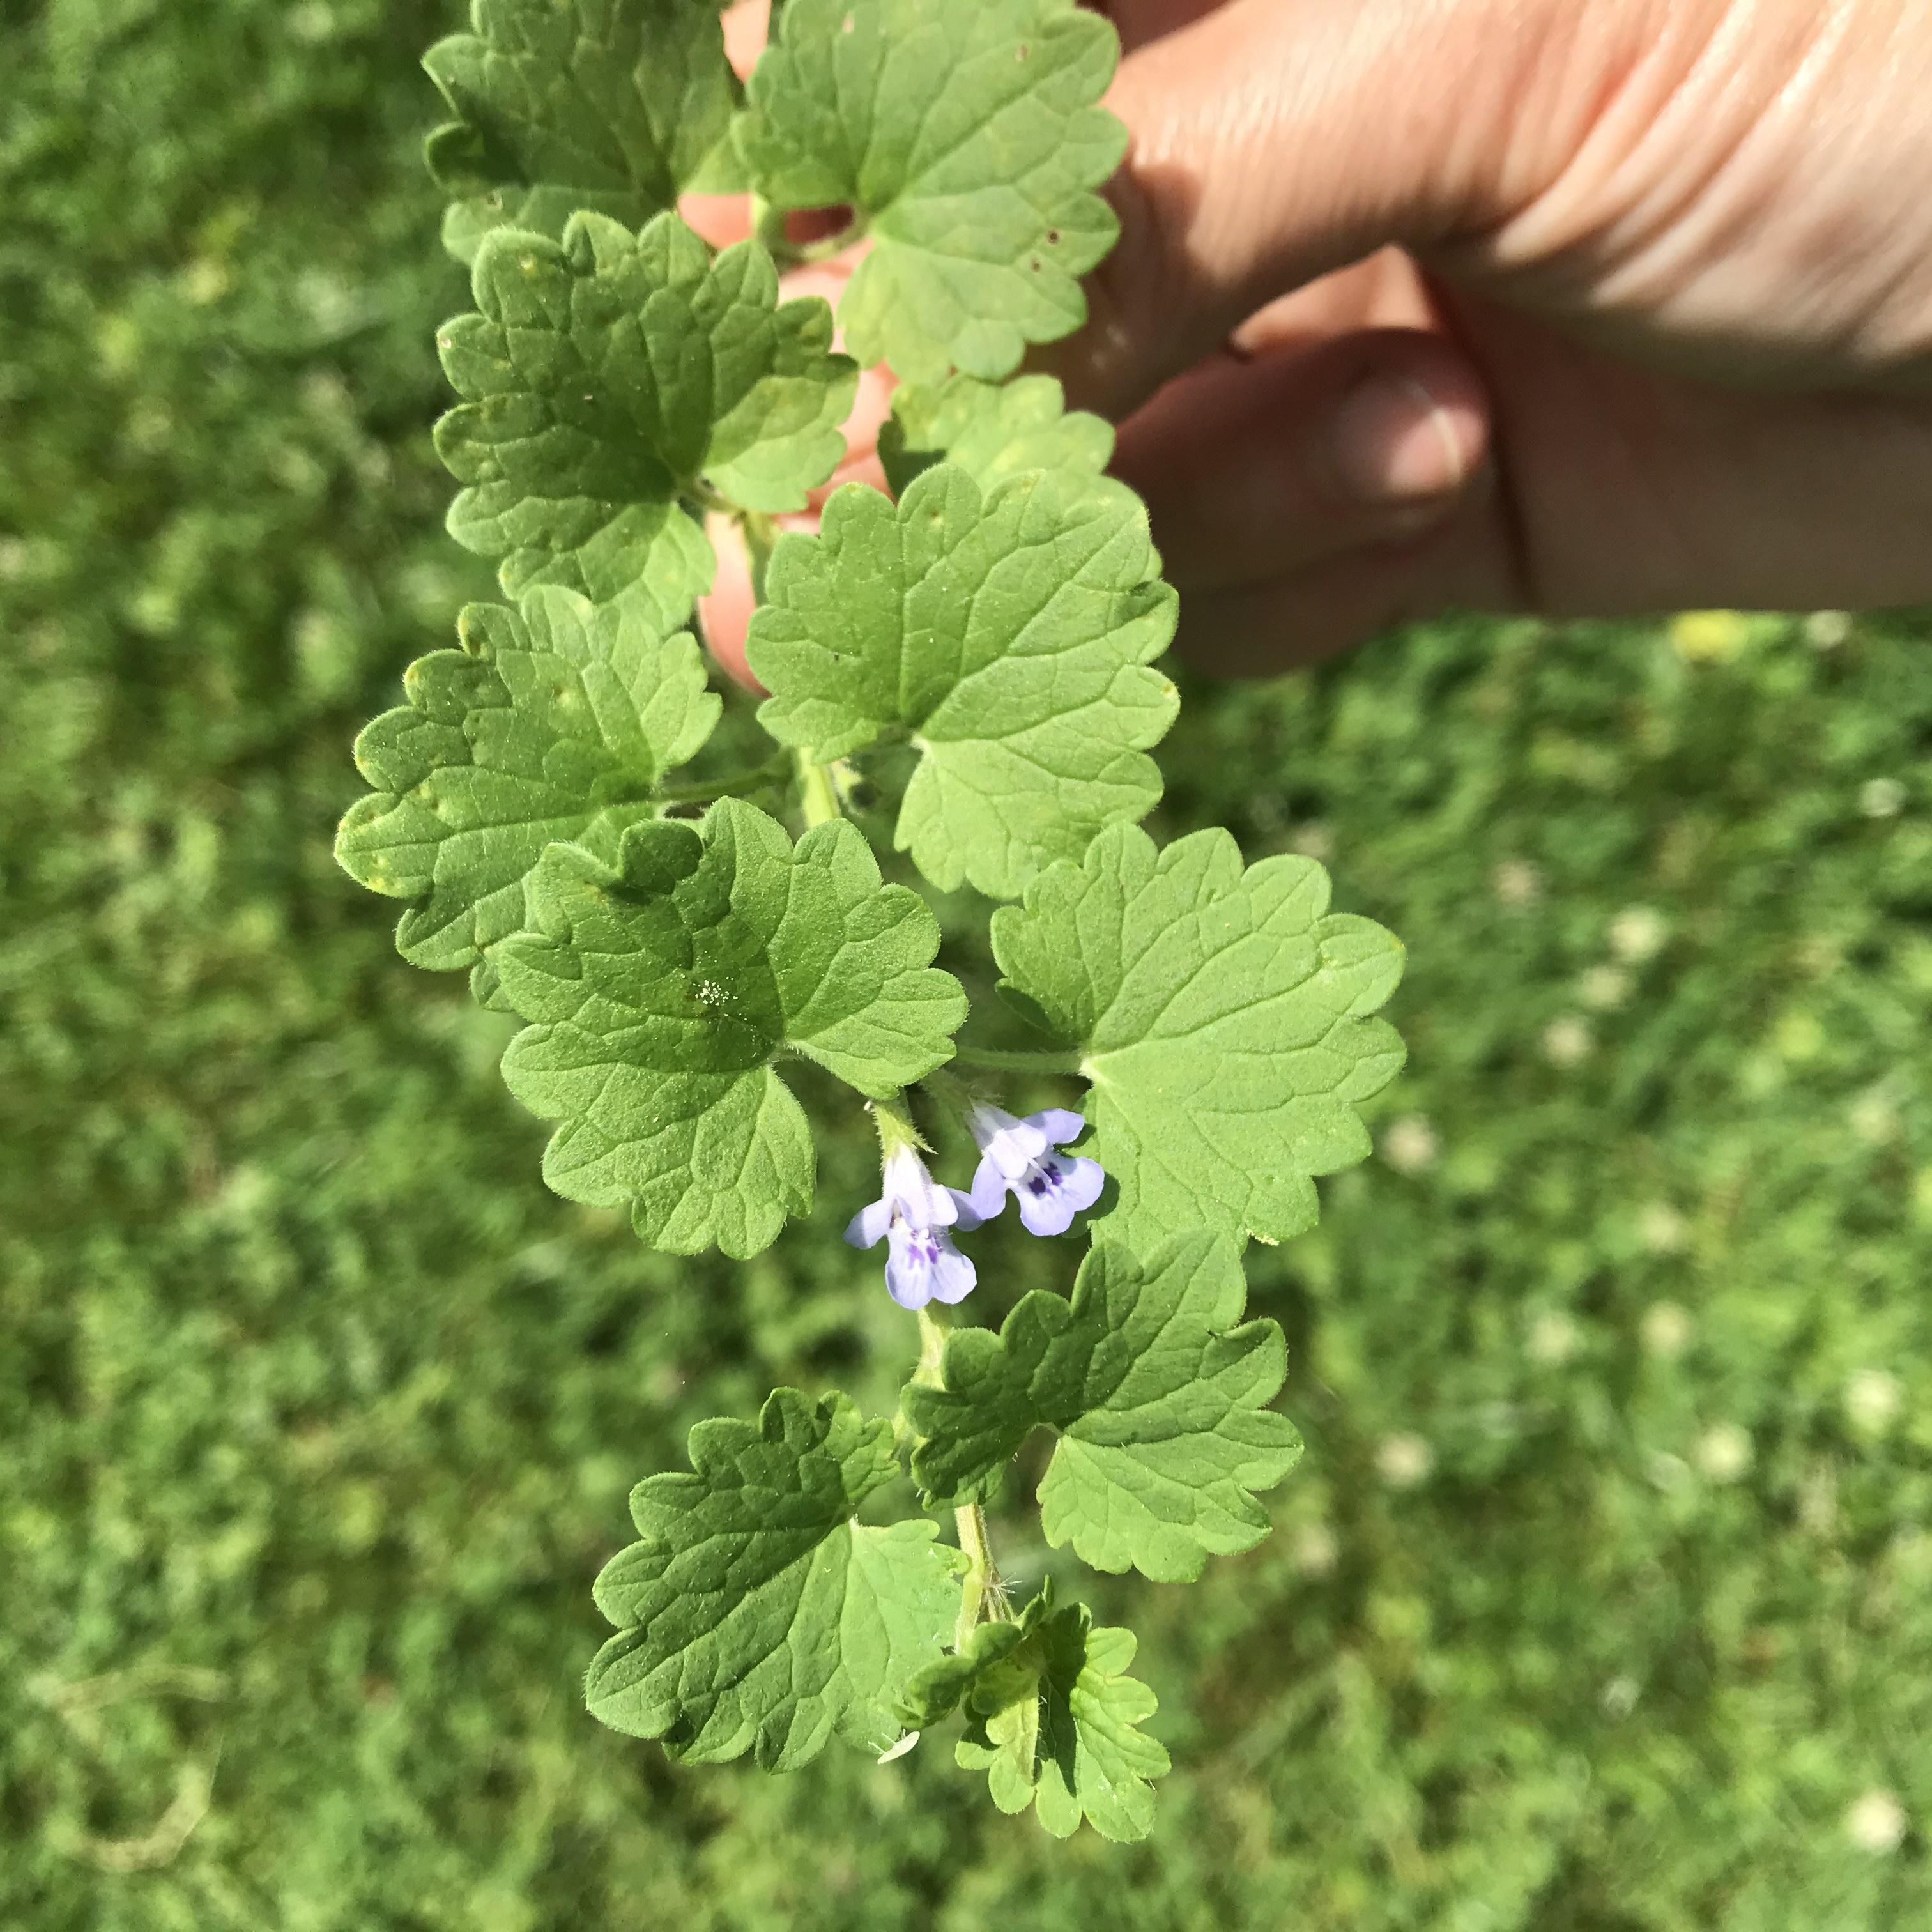 weed identification | university of maryland extension